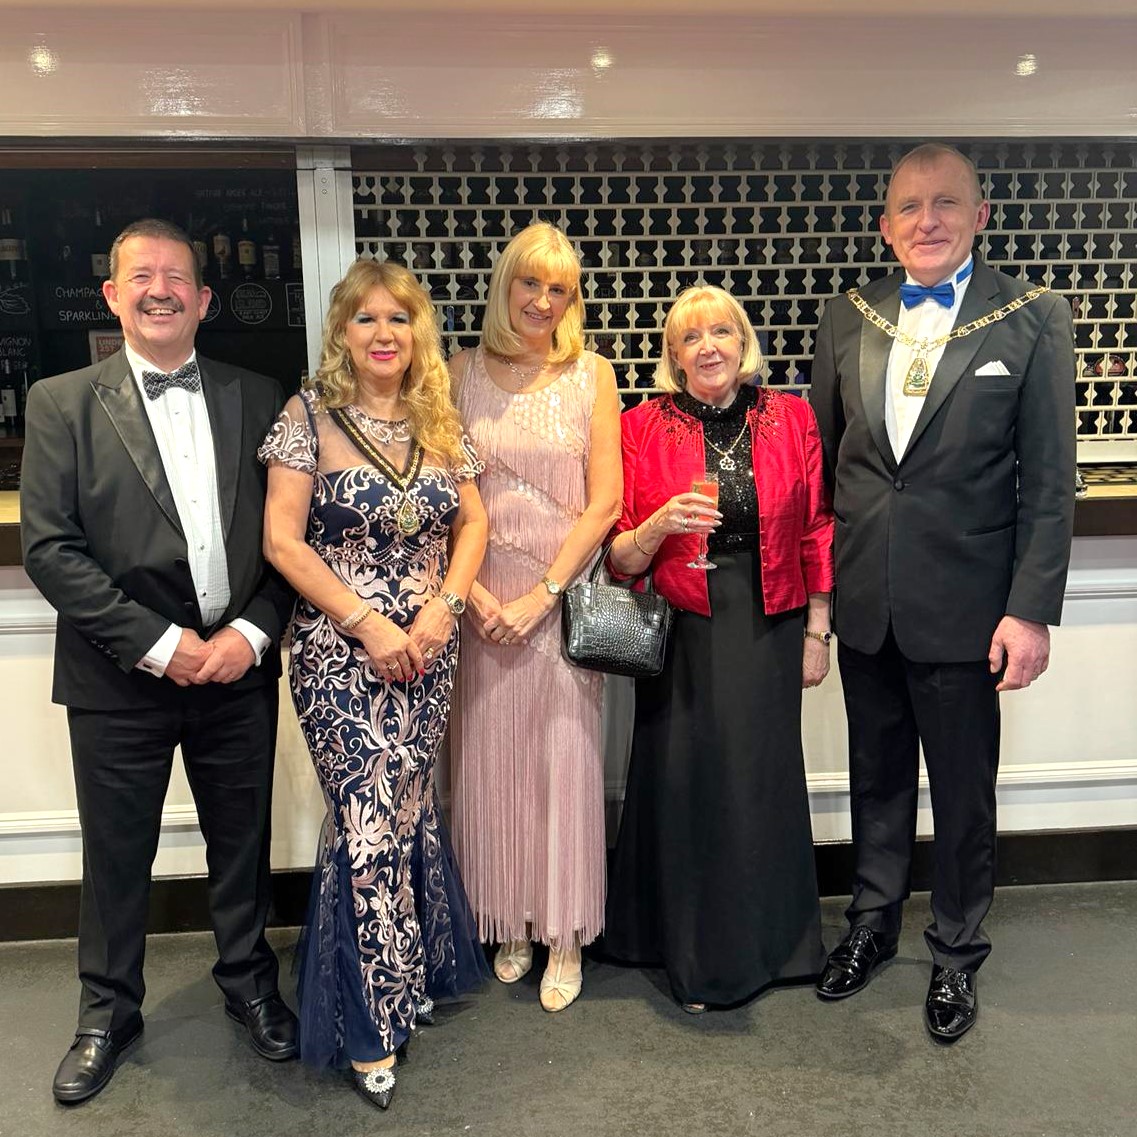 The Lord Mayor of Canterbury held their charity dinner dance last weekend, with the Mayor and Mayoress joining in support as representatives of Bromley.